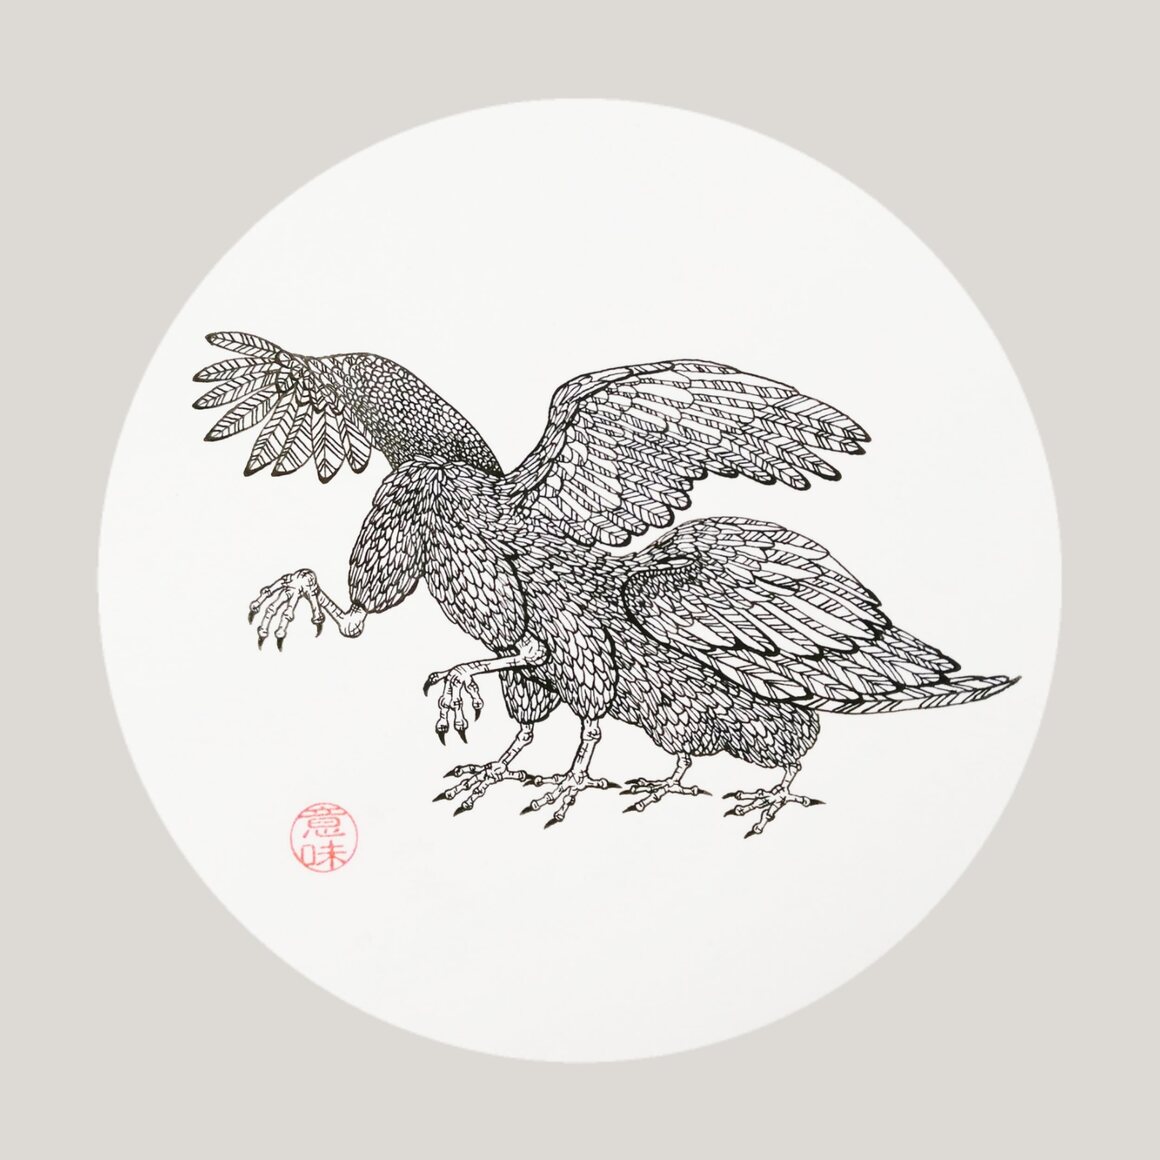 A Dijiang, from Chinese mythology, is a bird with multiple wings and feet, but no head.  